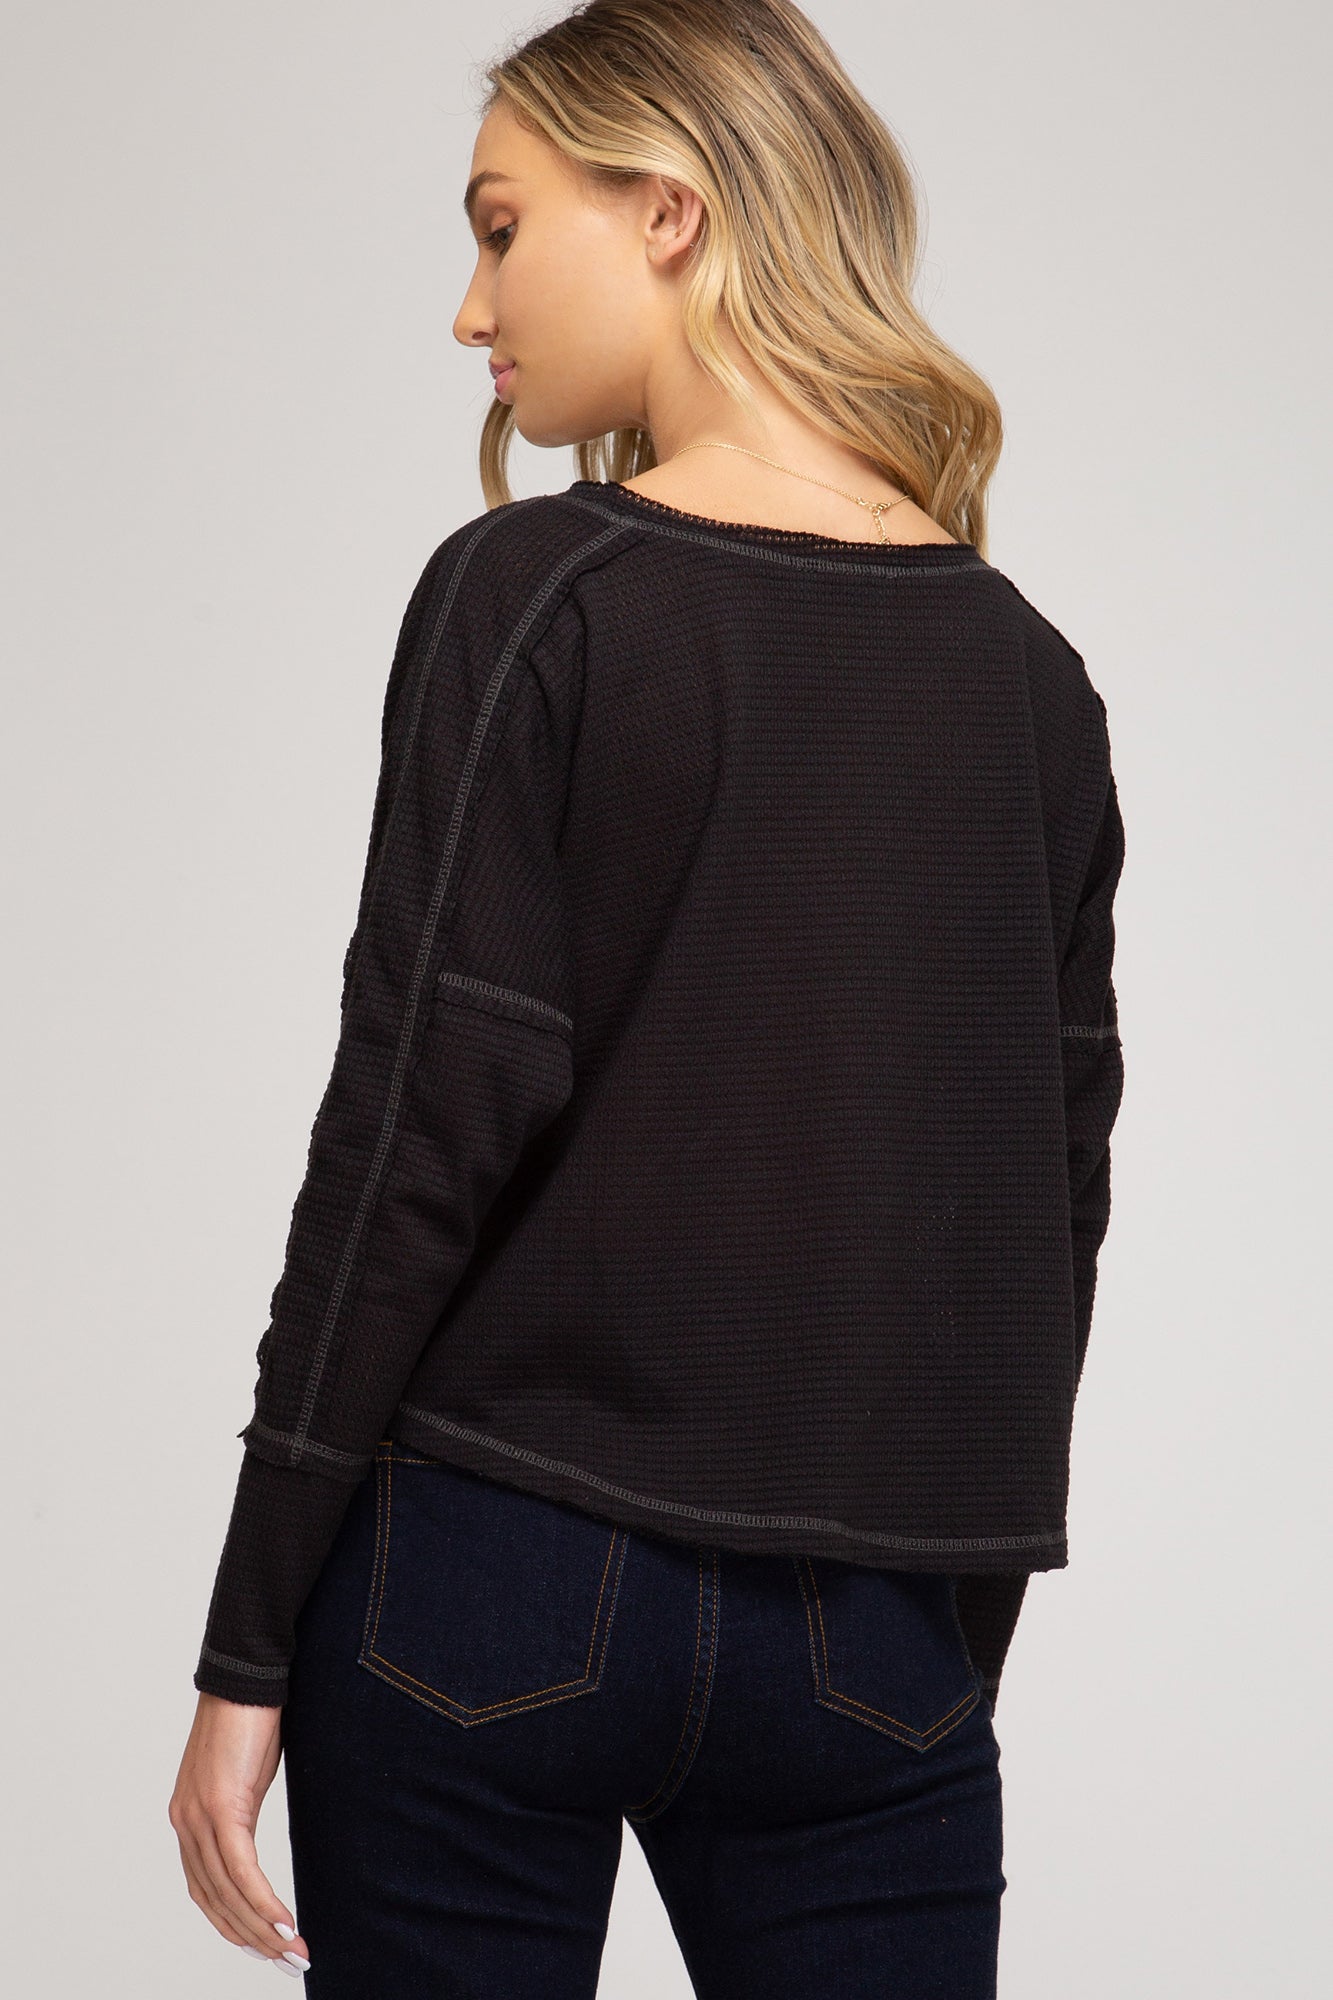 Long Sleeve Thermal Knit With Side Tie!